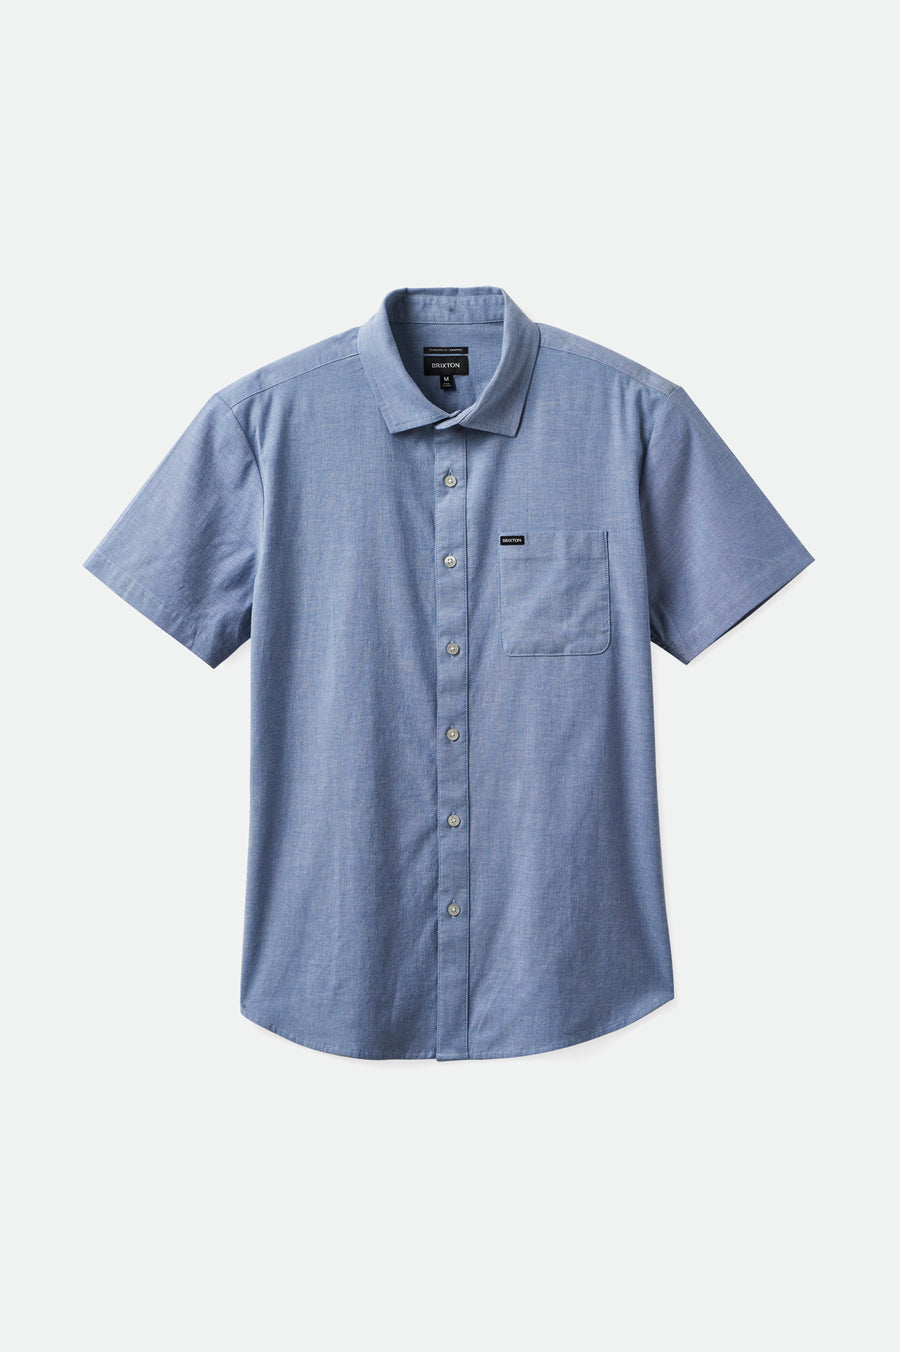 Charter Oxford S/S (Light Blue Chambray)